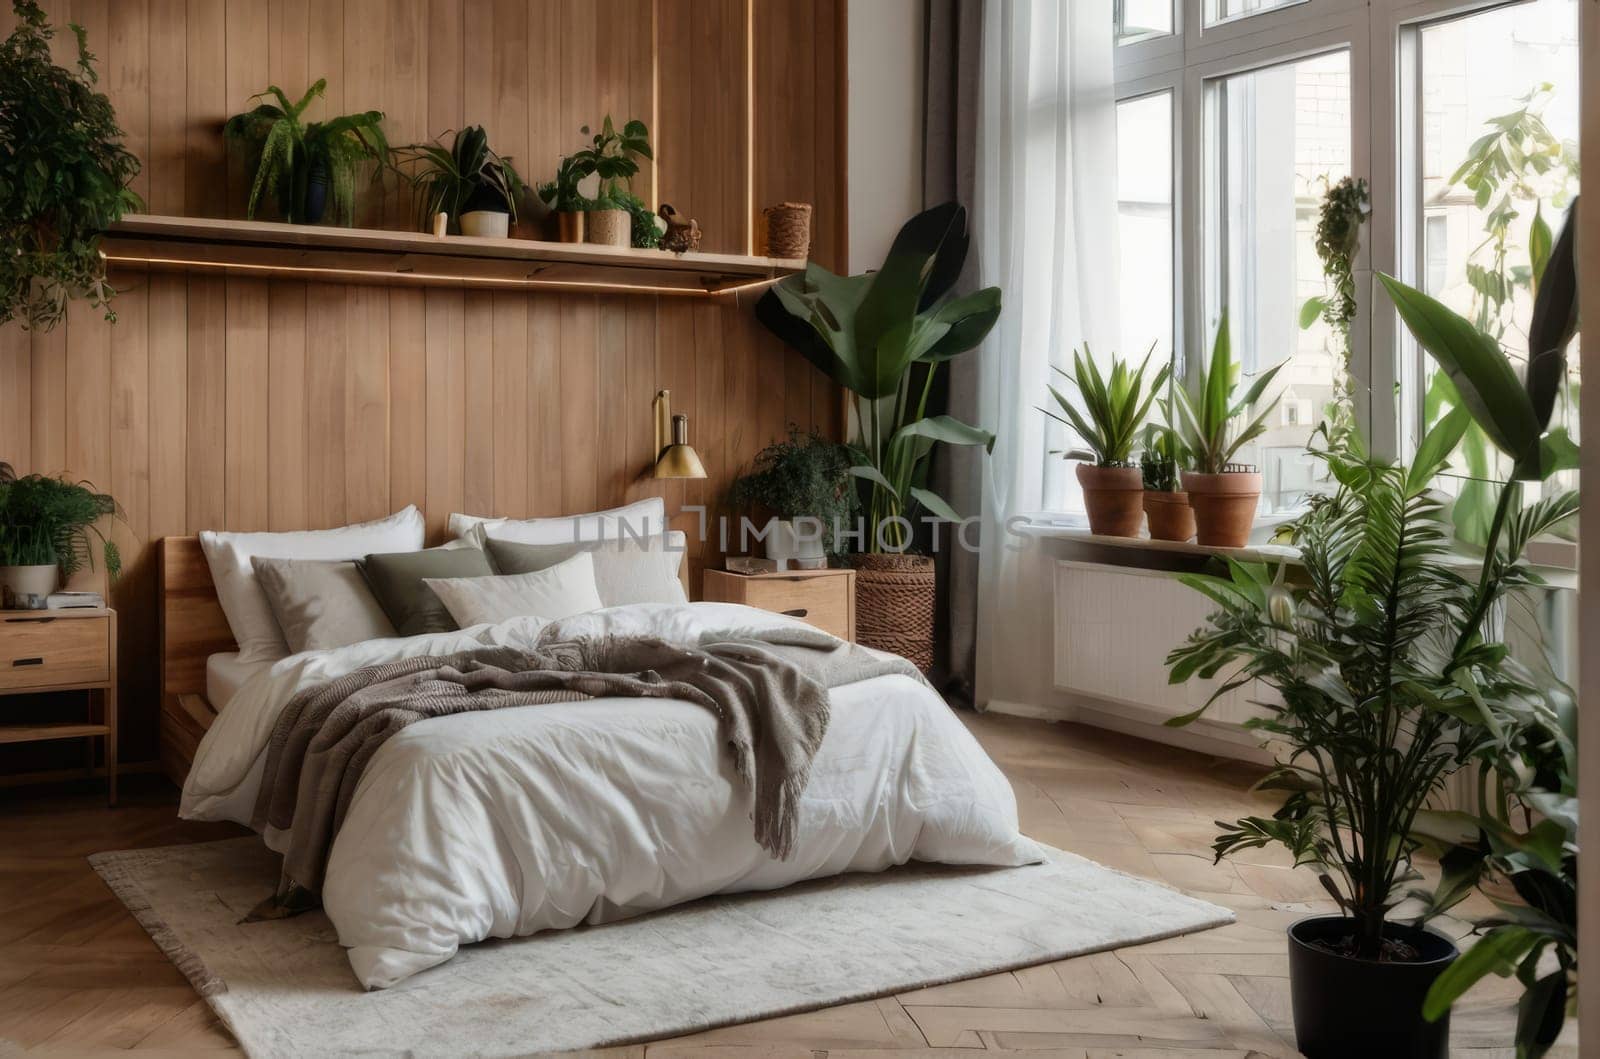 Cozy nook in a home garden, bedroom in white and wooden hues. Featuring bed, wooden floor, and a variety of plants. Interior design in urban jungle style. Biophilia concept